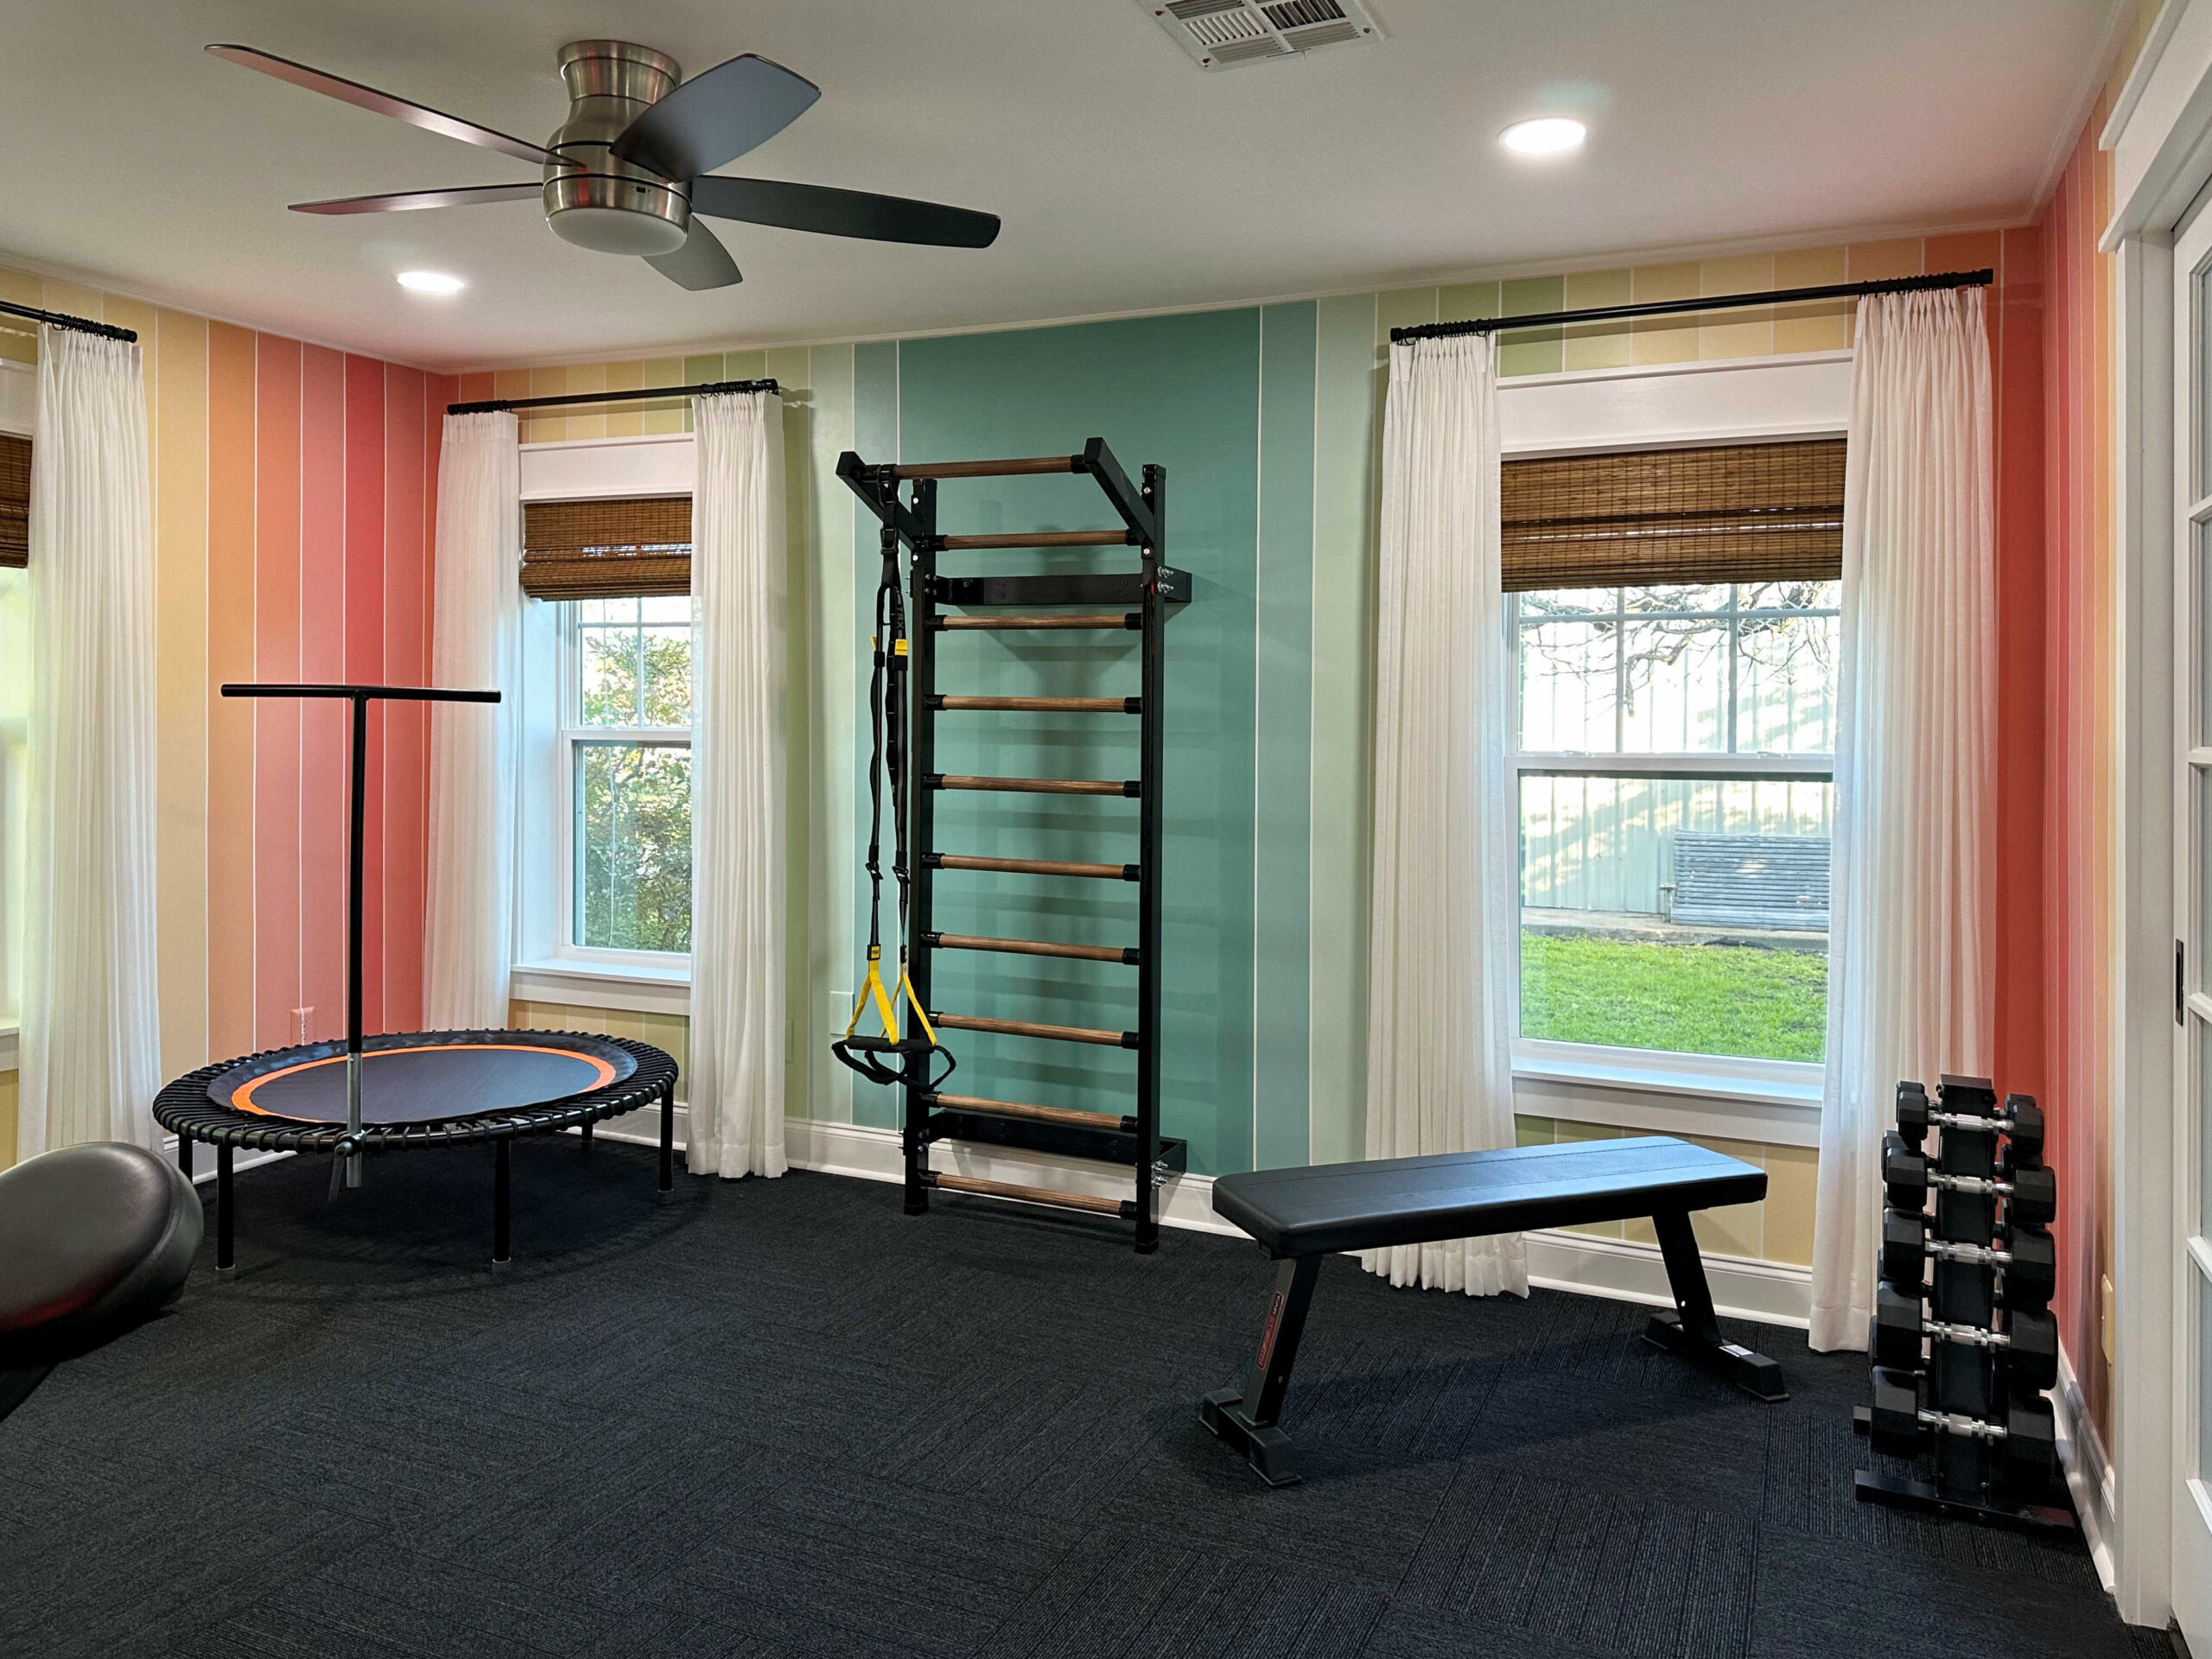 Home Gym Remodel From Start To Finish (Plus An Estimated Cost)